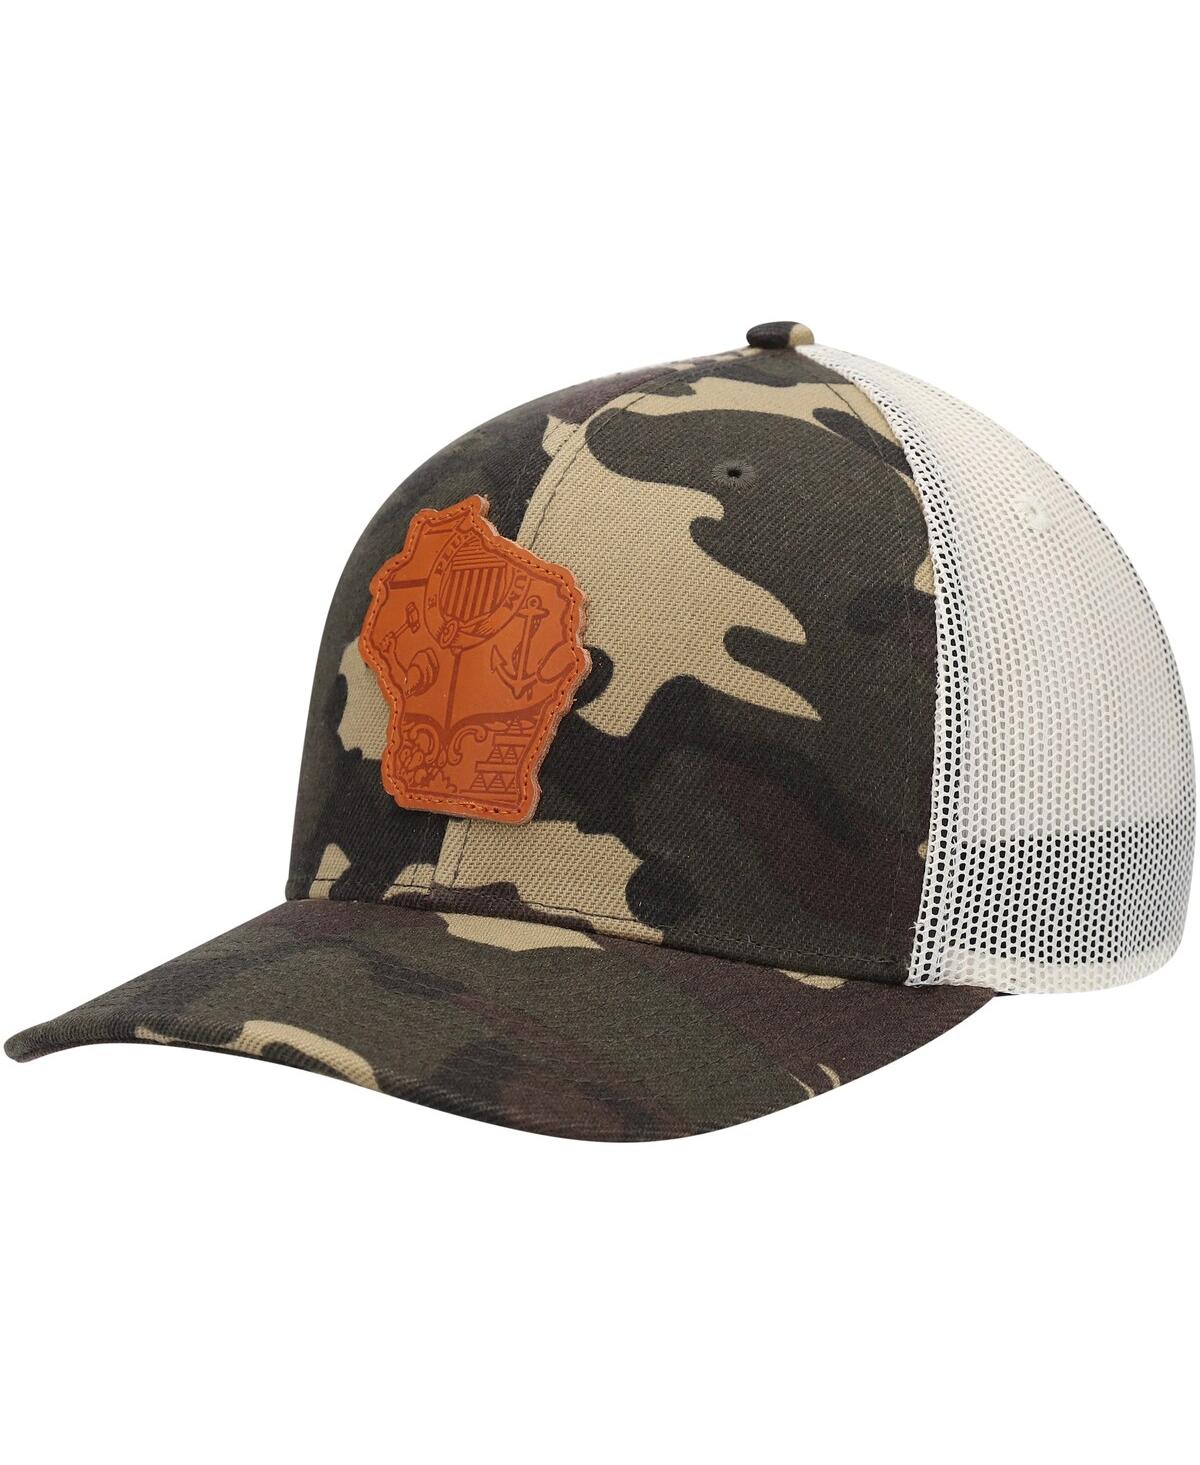 Shop Local Crowns Men's  Camo Wisconsin Icon Woodland State Patch Trucker Snapback Hat